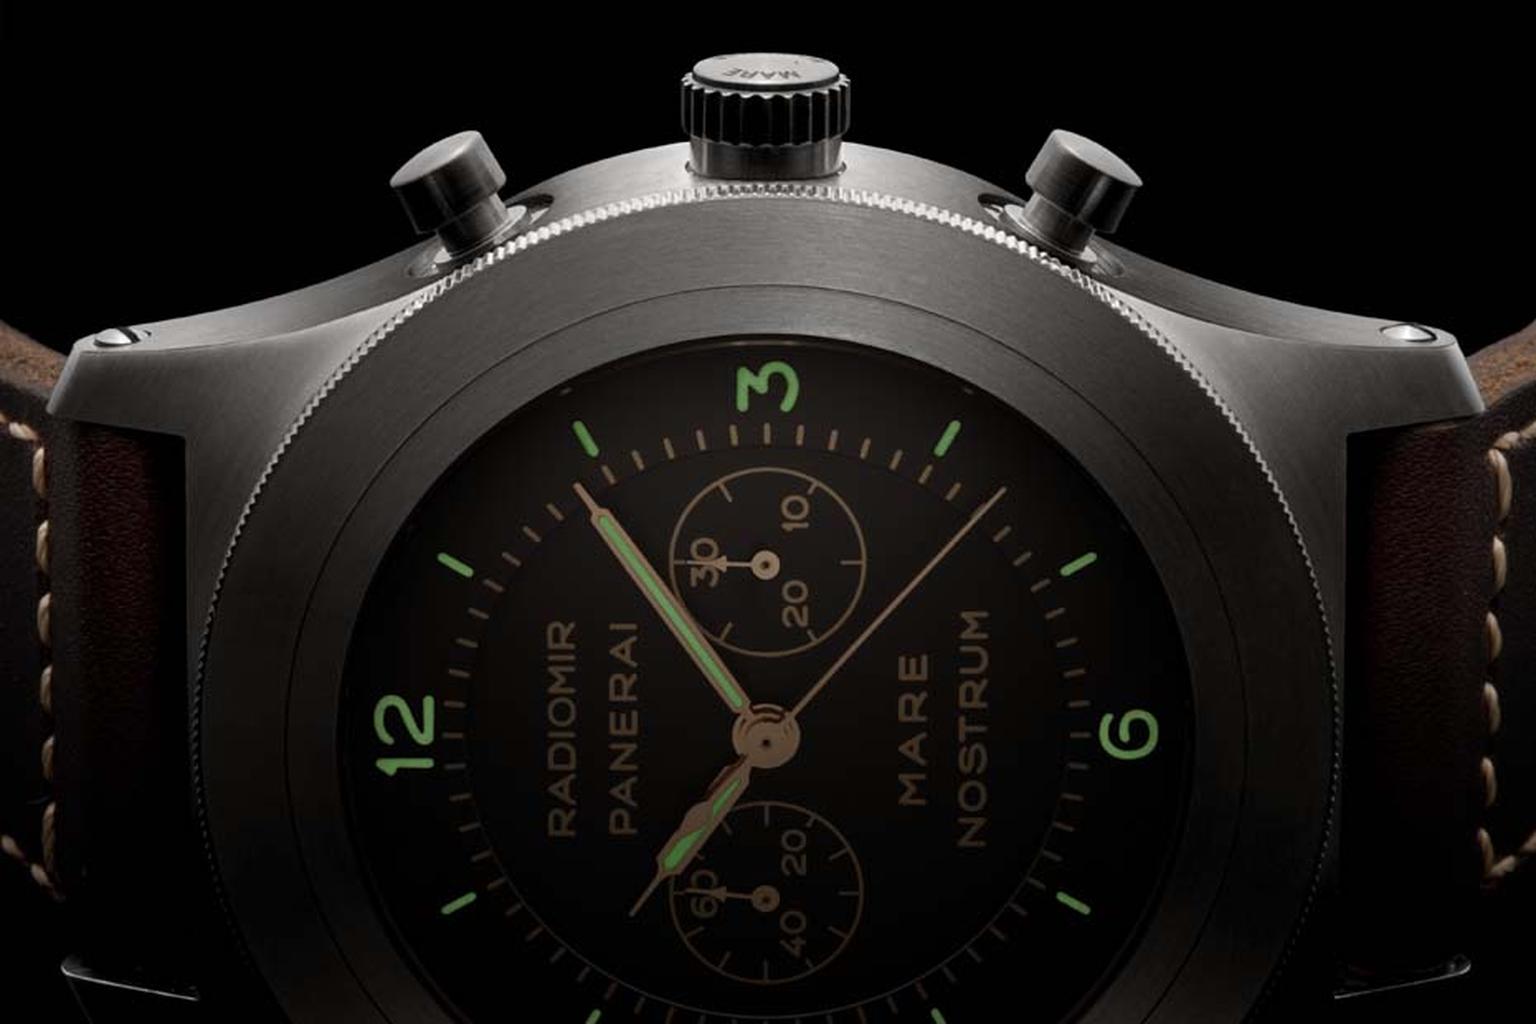 Panerai Mare Nostrum watch was re-edited this year. Unlike the original watch which was made from steel, this huge 53mm chronograph comes in a lightweight titanium case. The Mare Nostrum is a limited edition of 300 pieces.